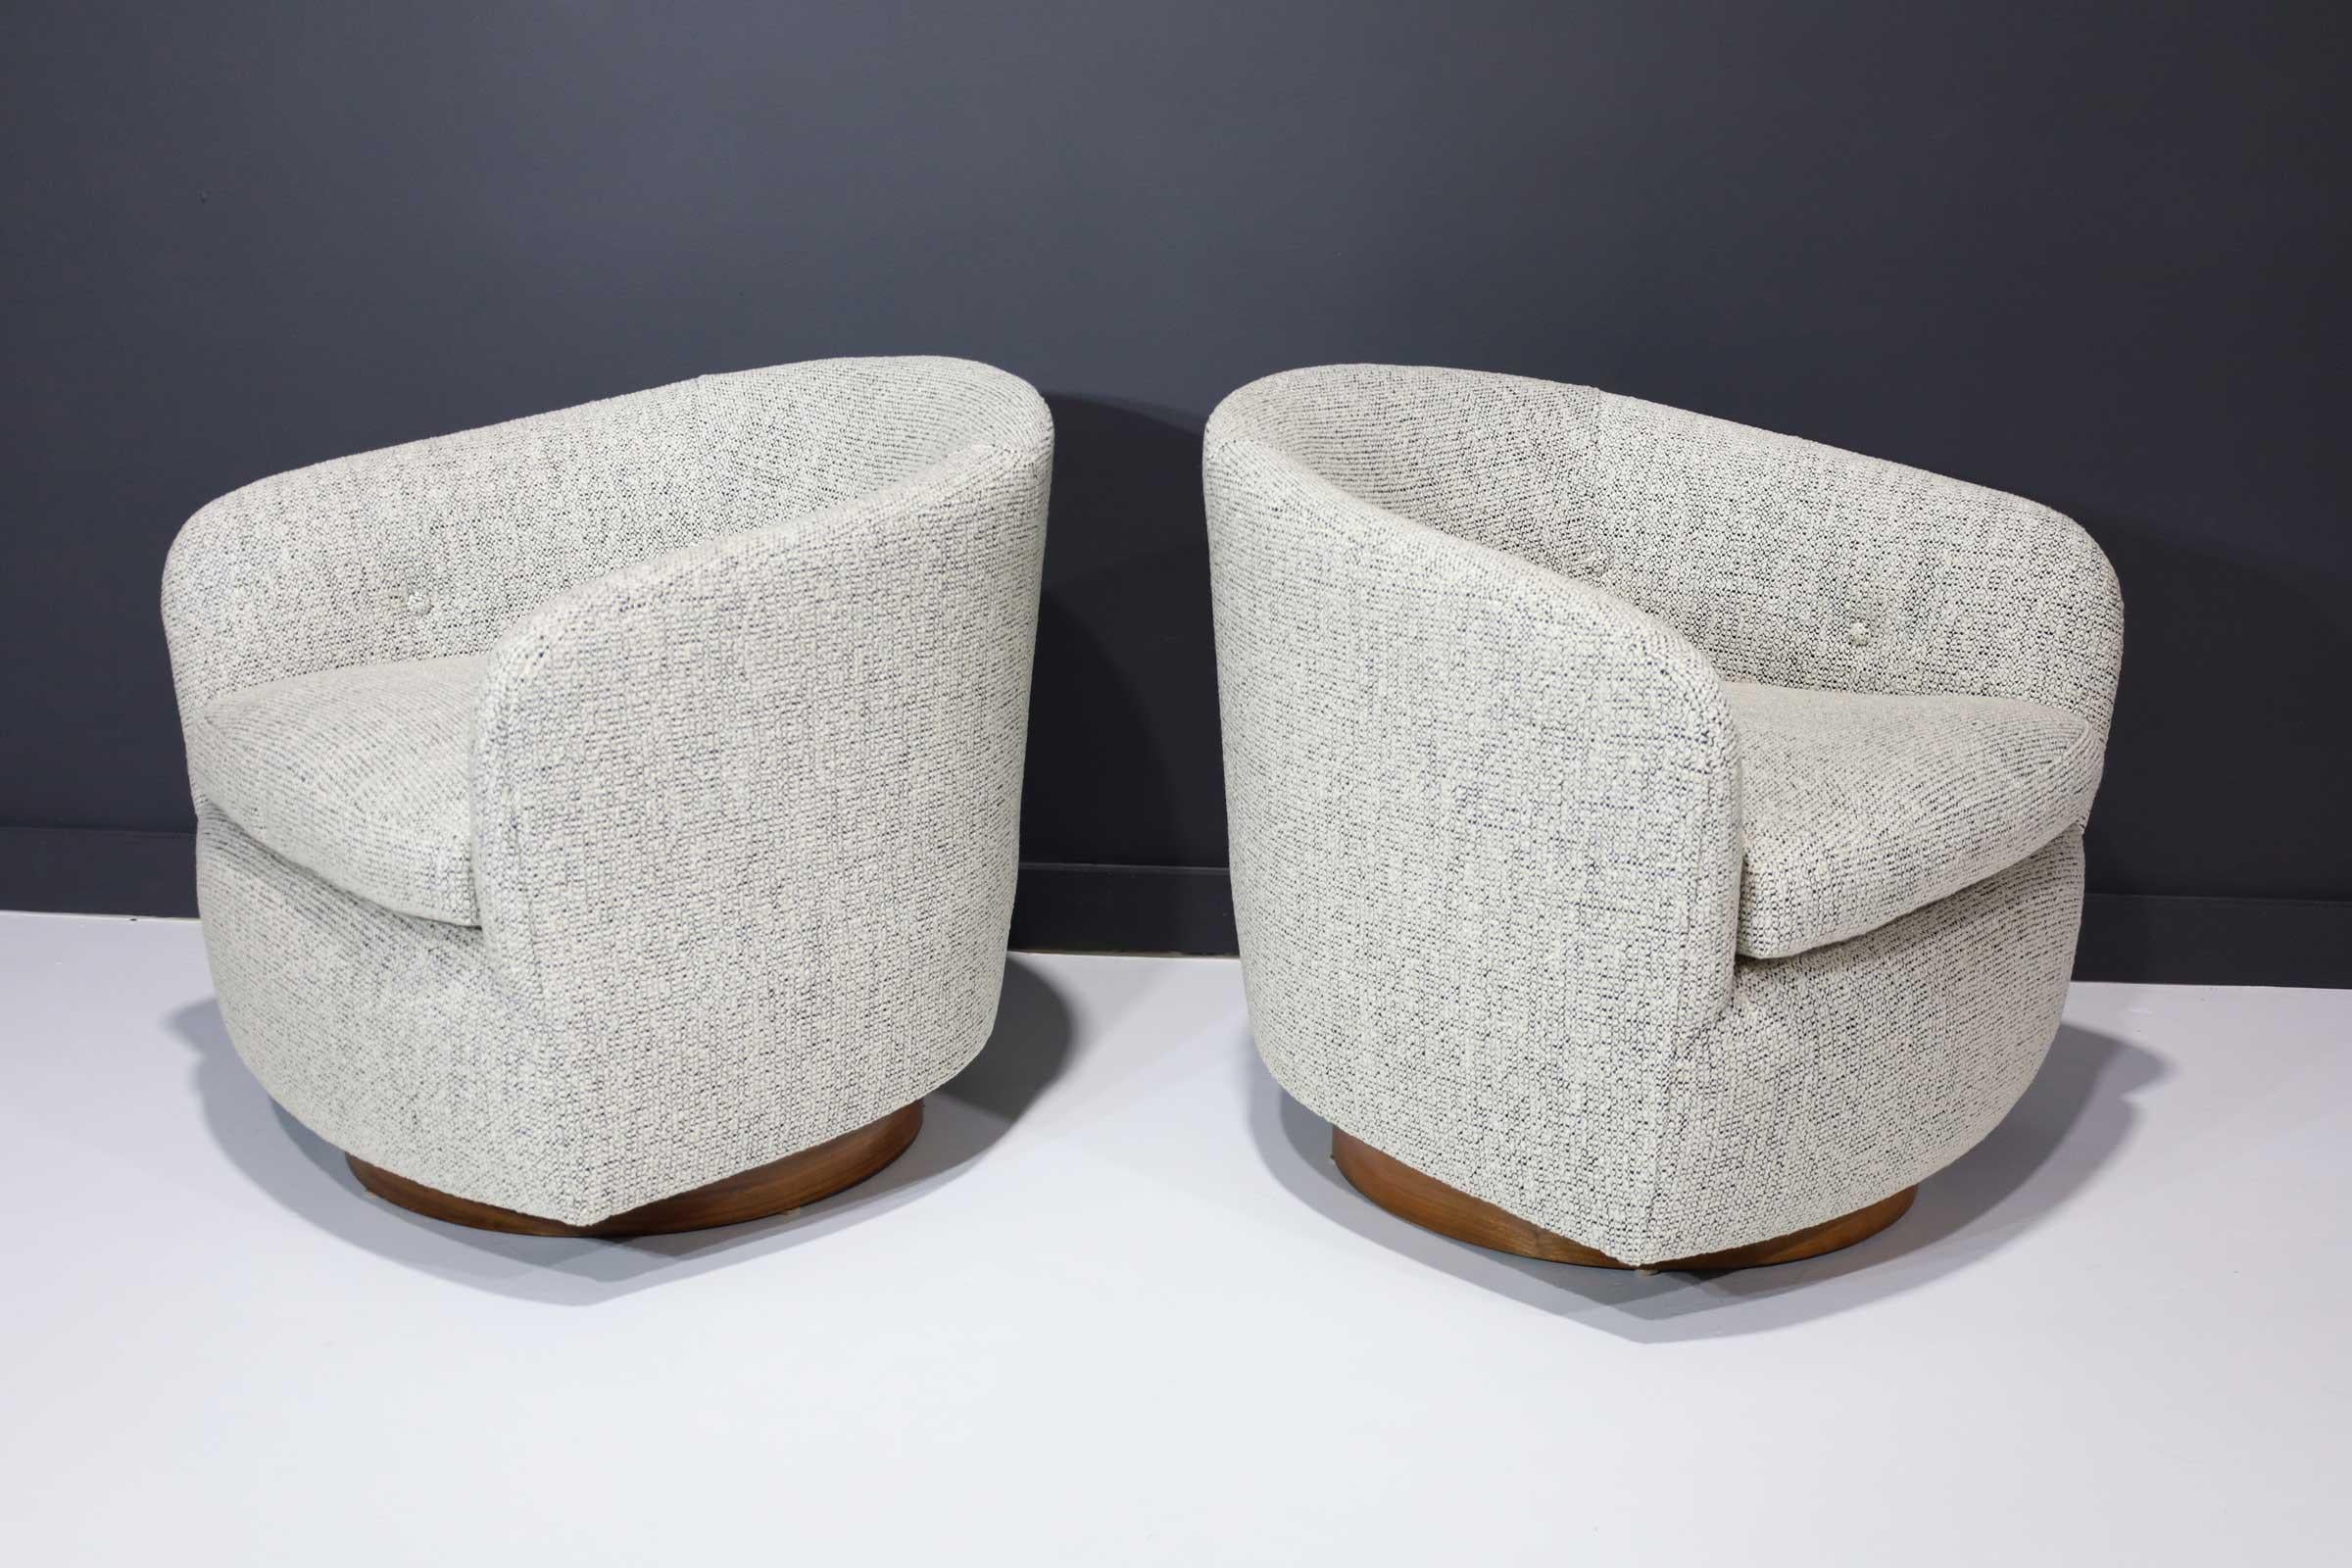 Newly reupholstered in high quality boucle like black and white texture. Walnut bases.